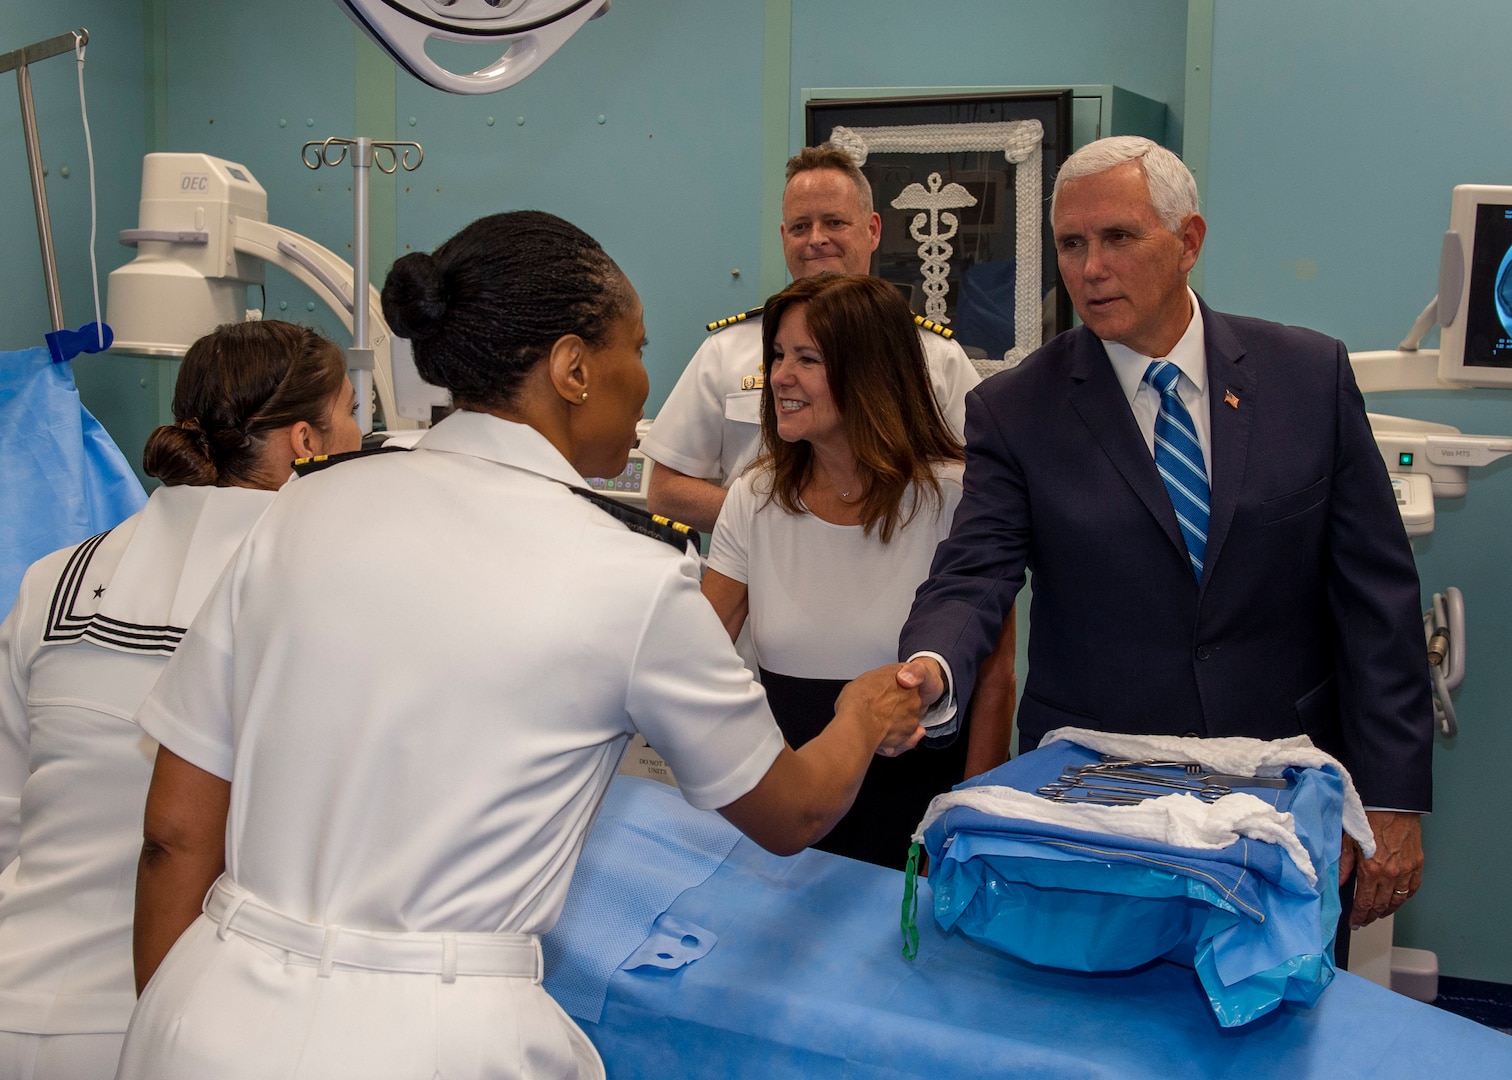 Vice President Mike Pence greets Lt. Gwendolyn Mann, from Hampton, Va. and second lady Karen Pence greets Hospital Corpsman 1st Class Edna Wallace from El Paso, Texas during a tour aboard hospital ship USNS Comfort (T-AH 20).